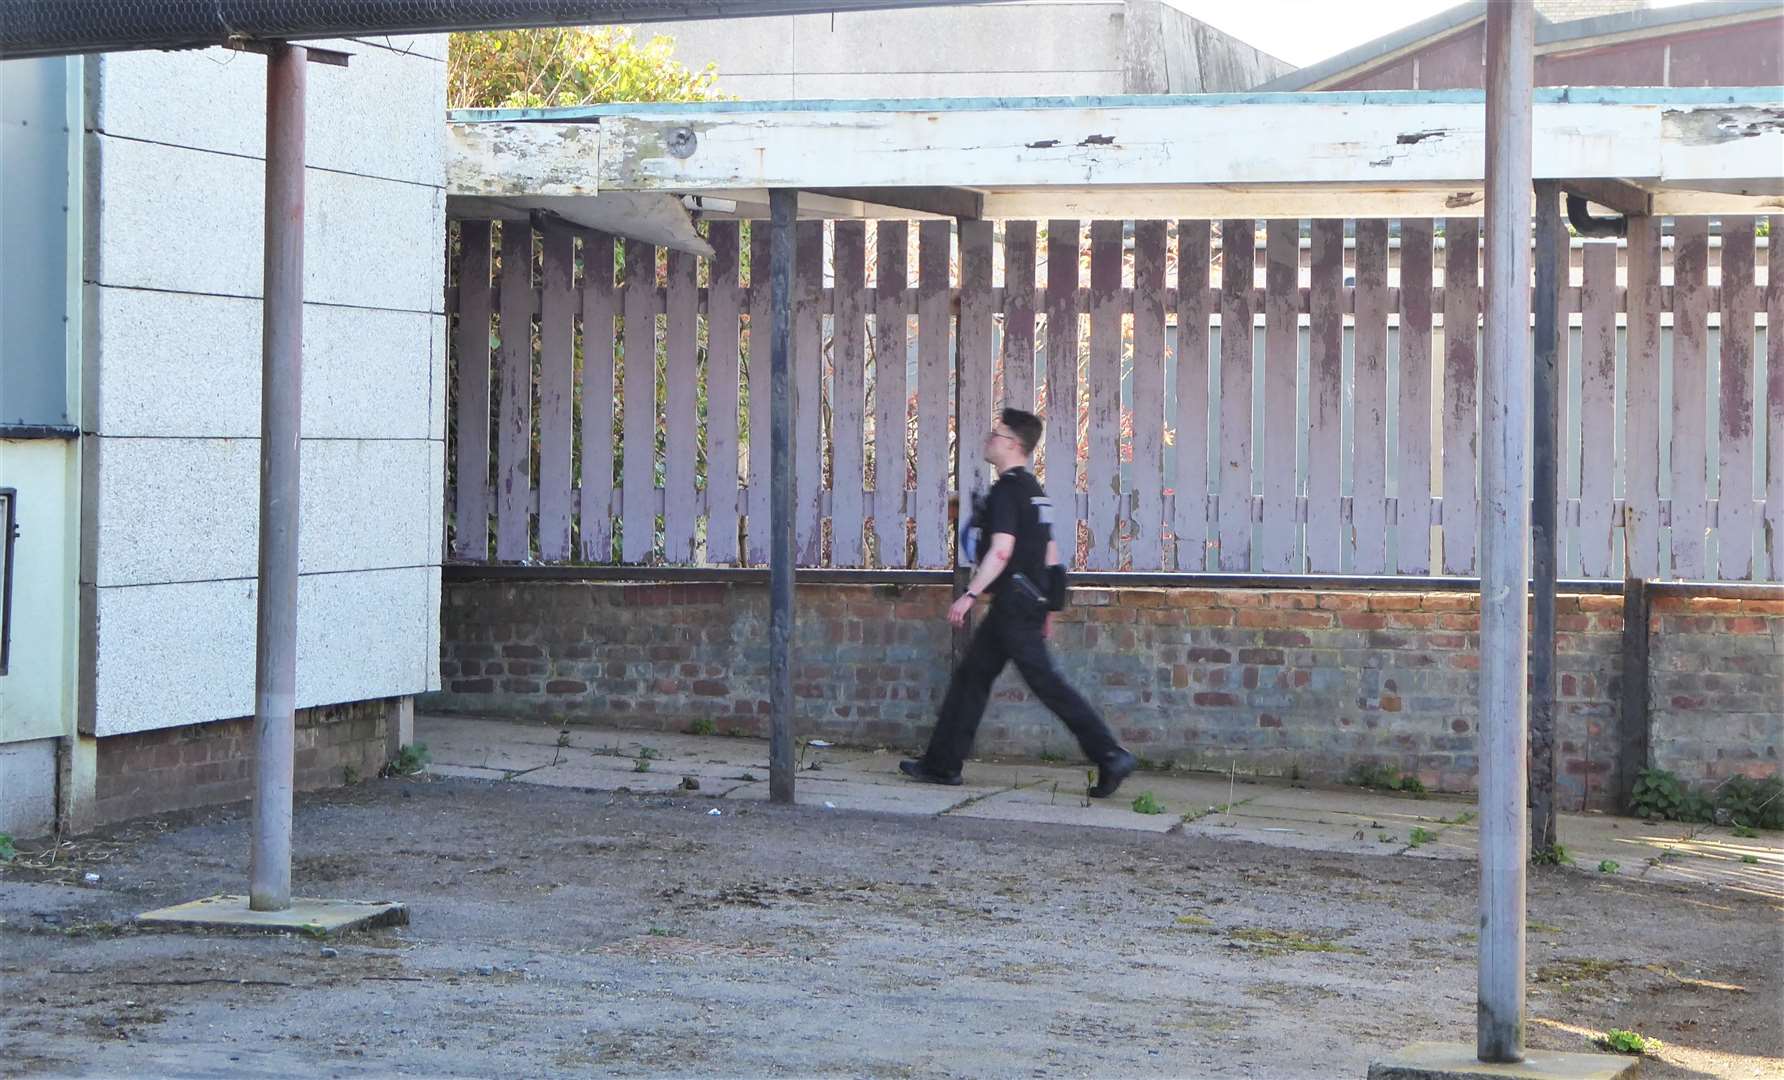 A police officer within the grounds of the empty building.